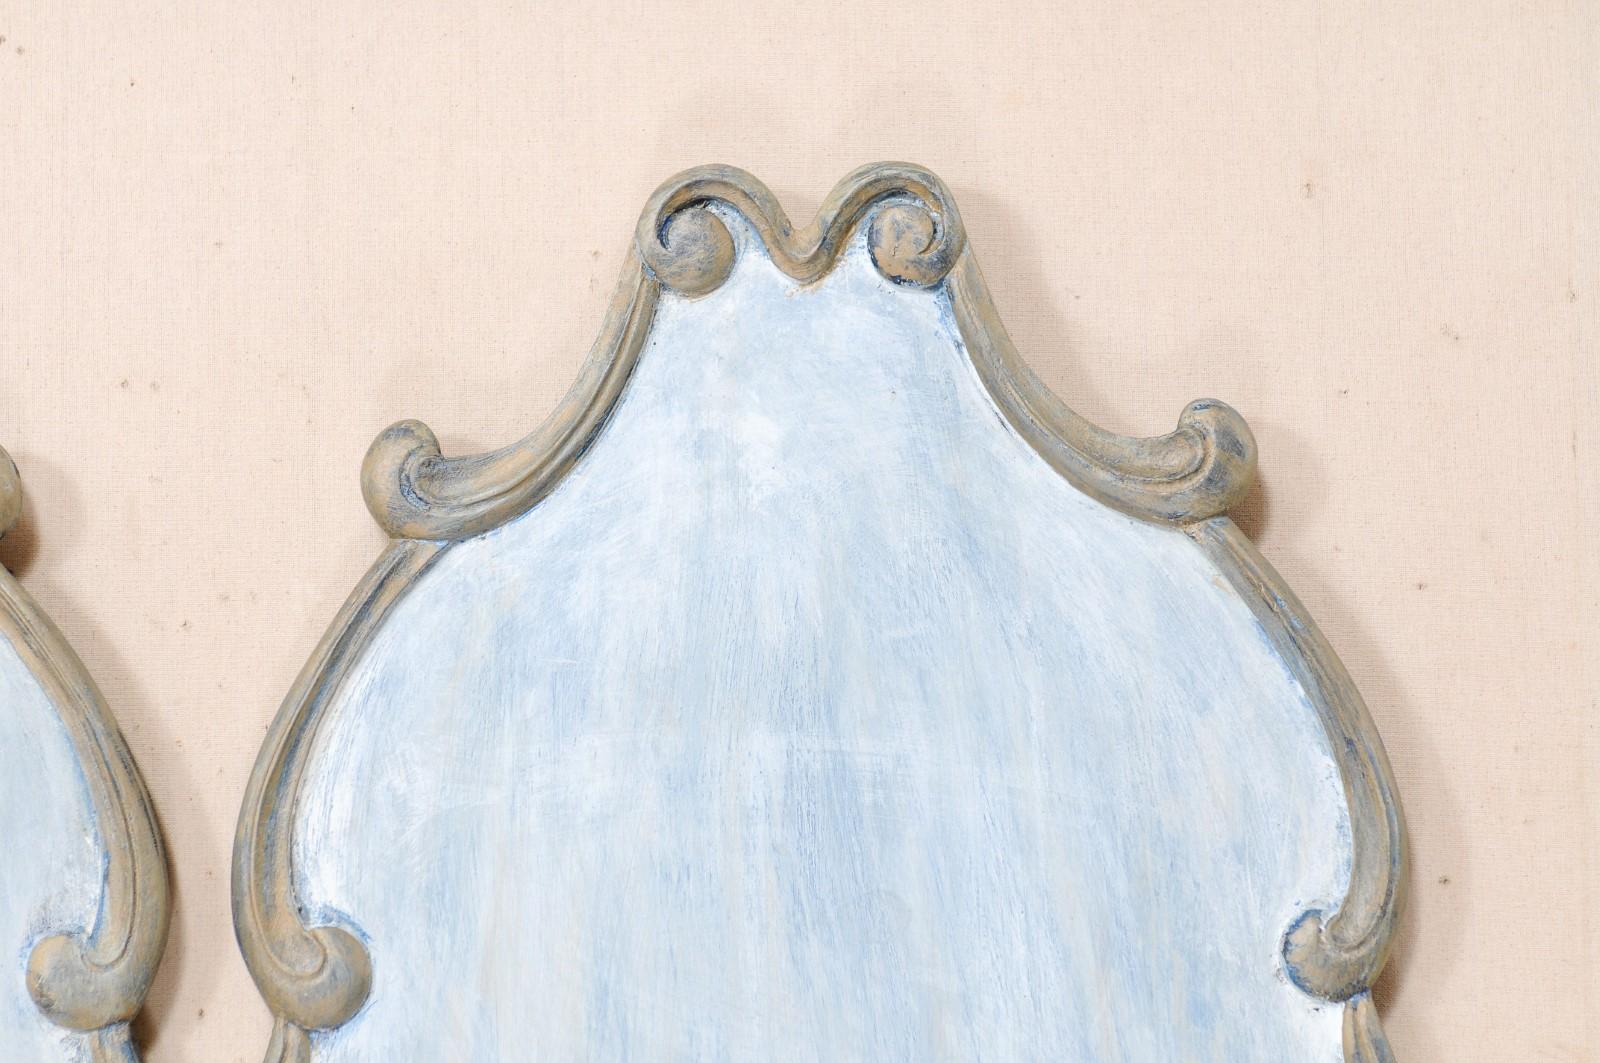 Pair of Custom Carved Wall Plaques in Blue & Pewter with Scrolling Trim Boarder For Sale 3